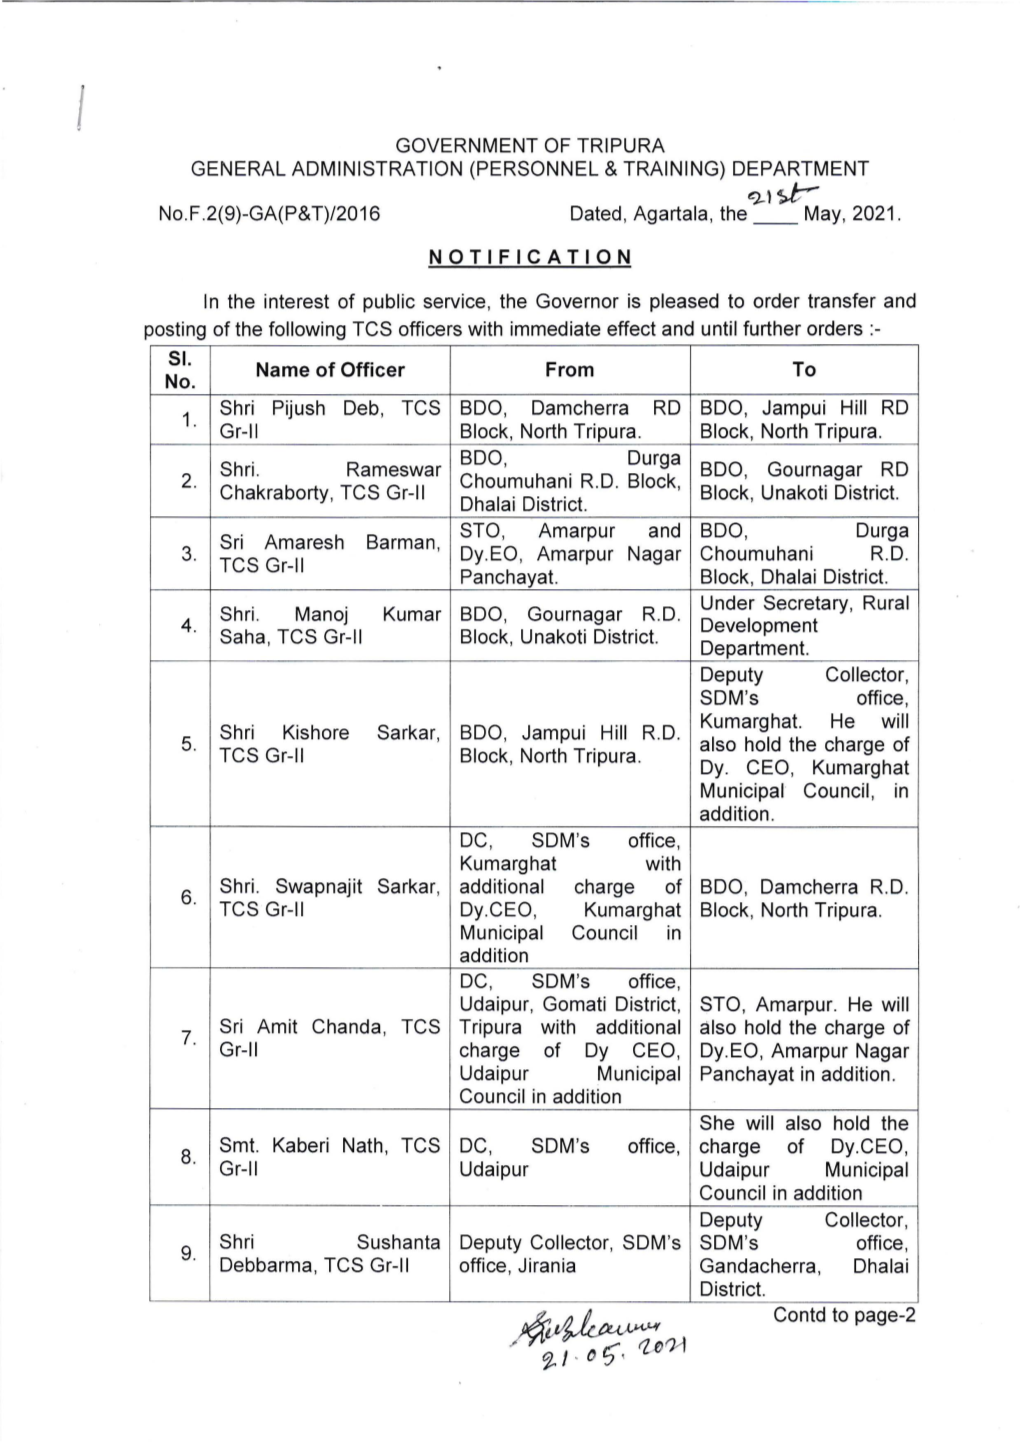 NOTIFICATION 51. Name of Officer from To